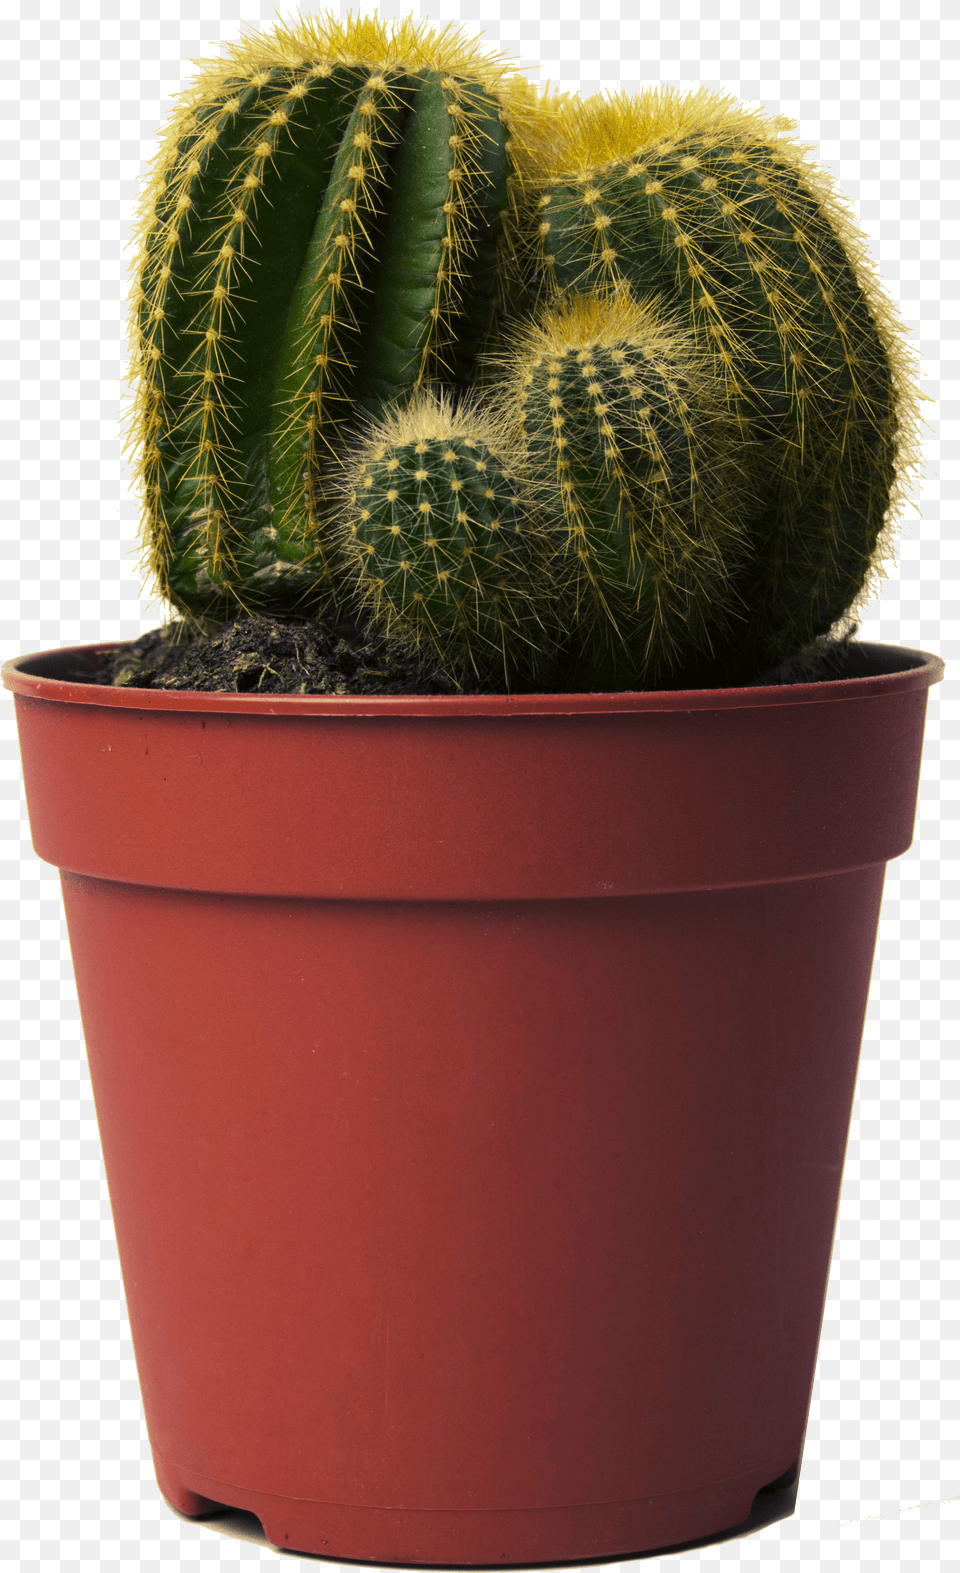 Cactus Small Cactus In Pot Png Image